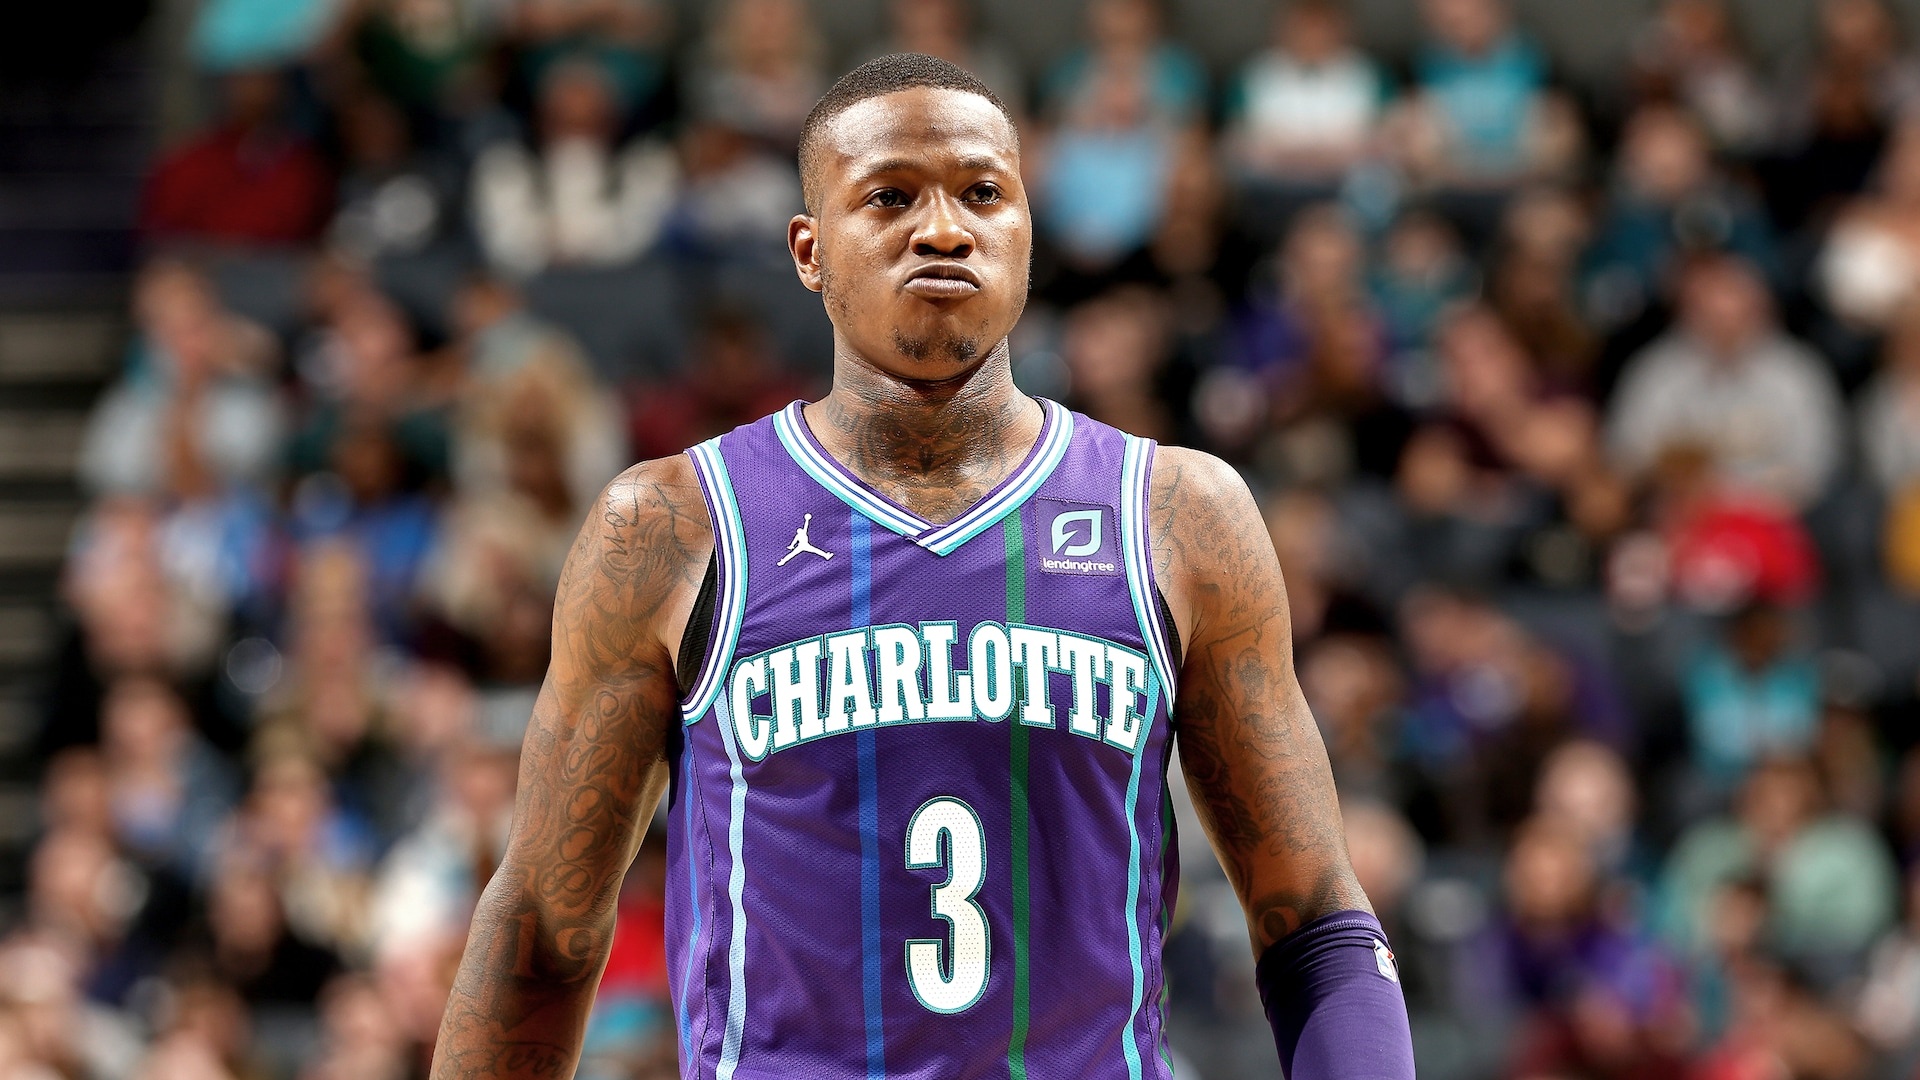 Terry Rozier, Fine by the league, Disciplinary action, Charlotte Hornets news, 1920x1080 Full HD Desktop